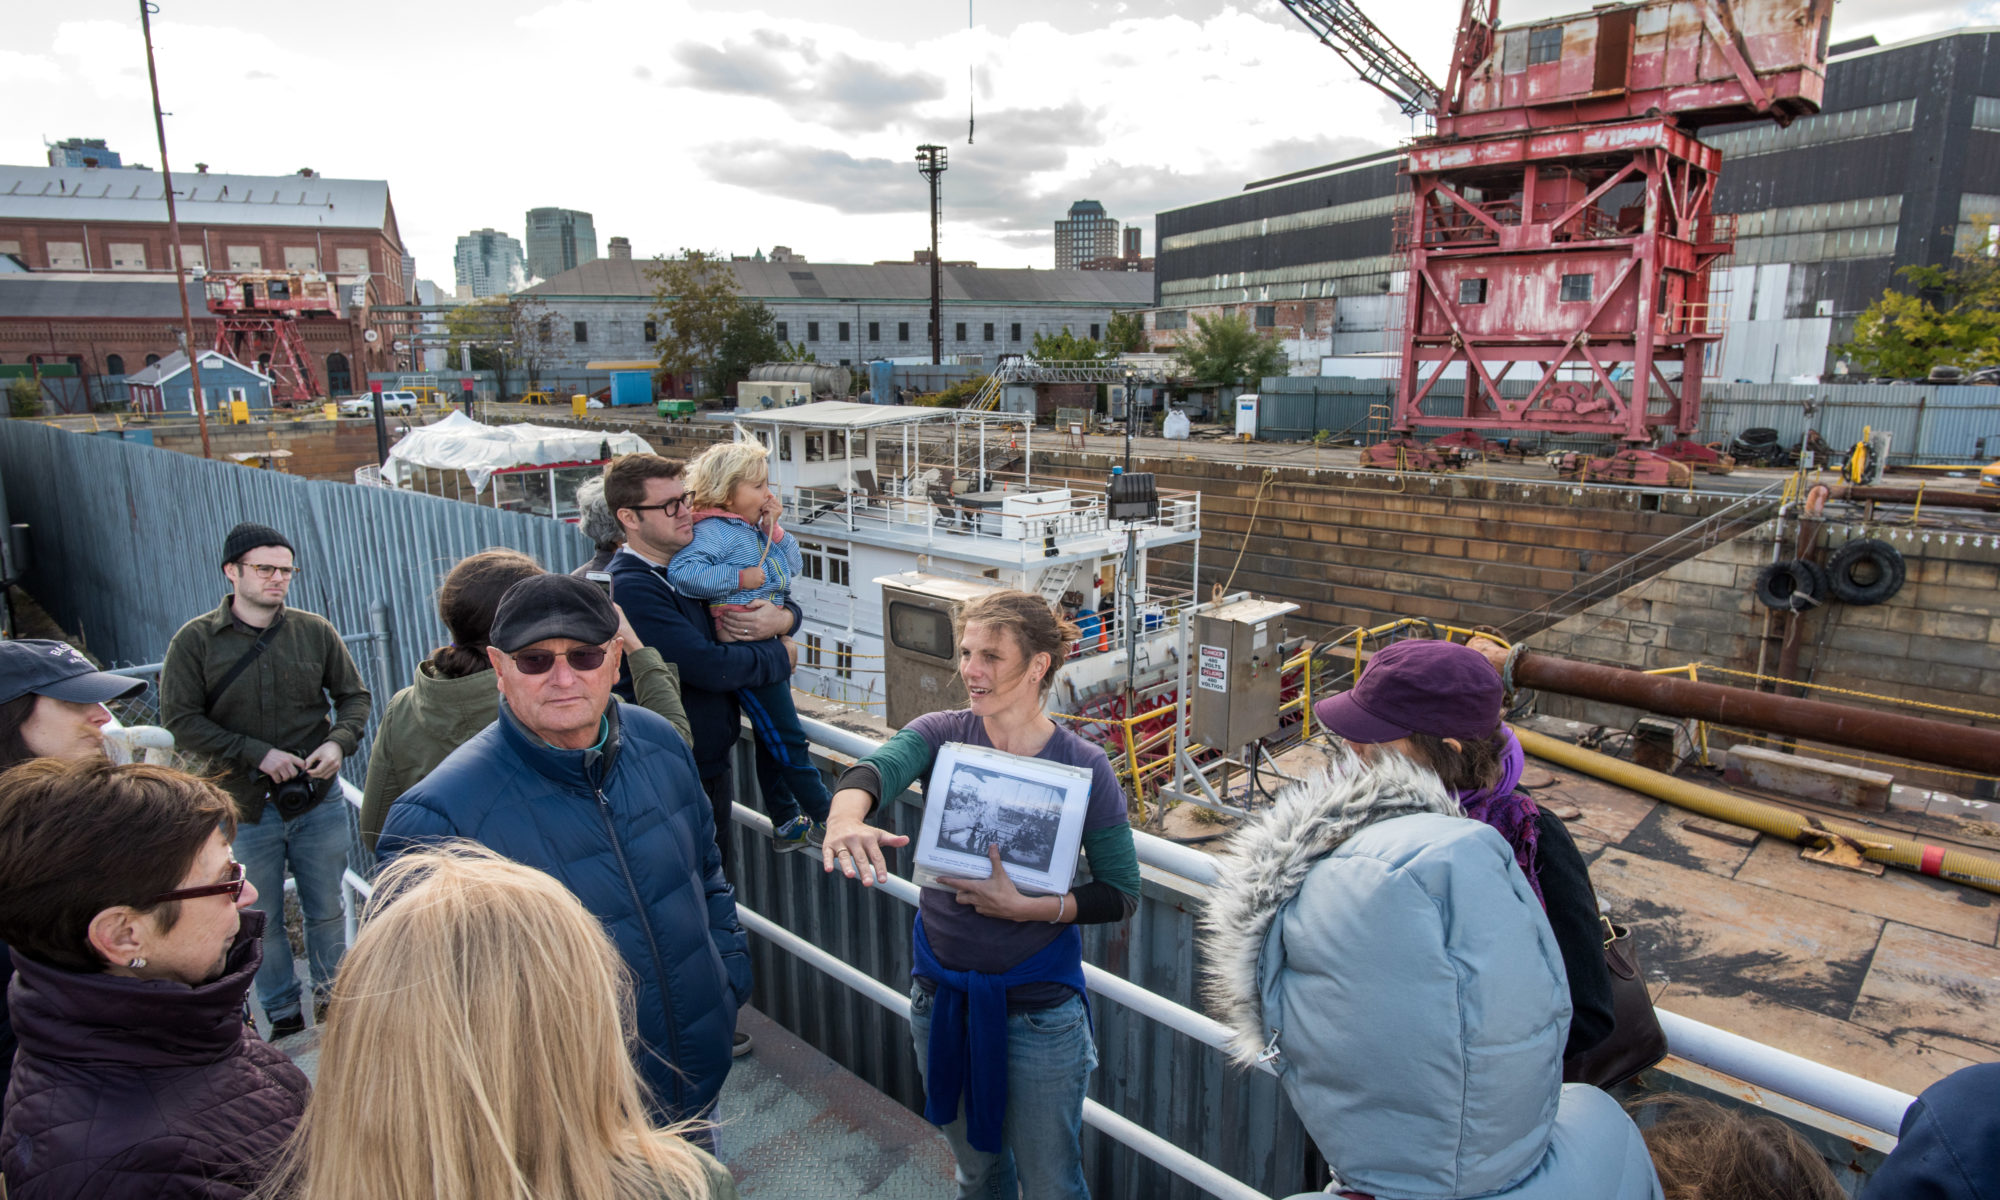 A group of people led by a tour guide stand on a platform looking out at a ferry in a dry dock next to a red crane